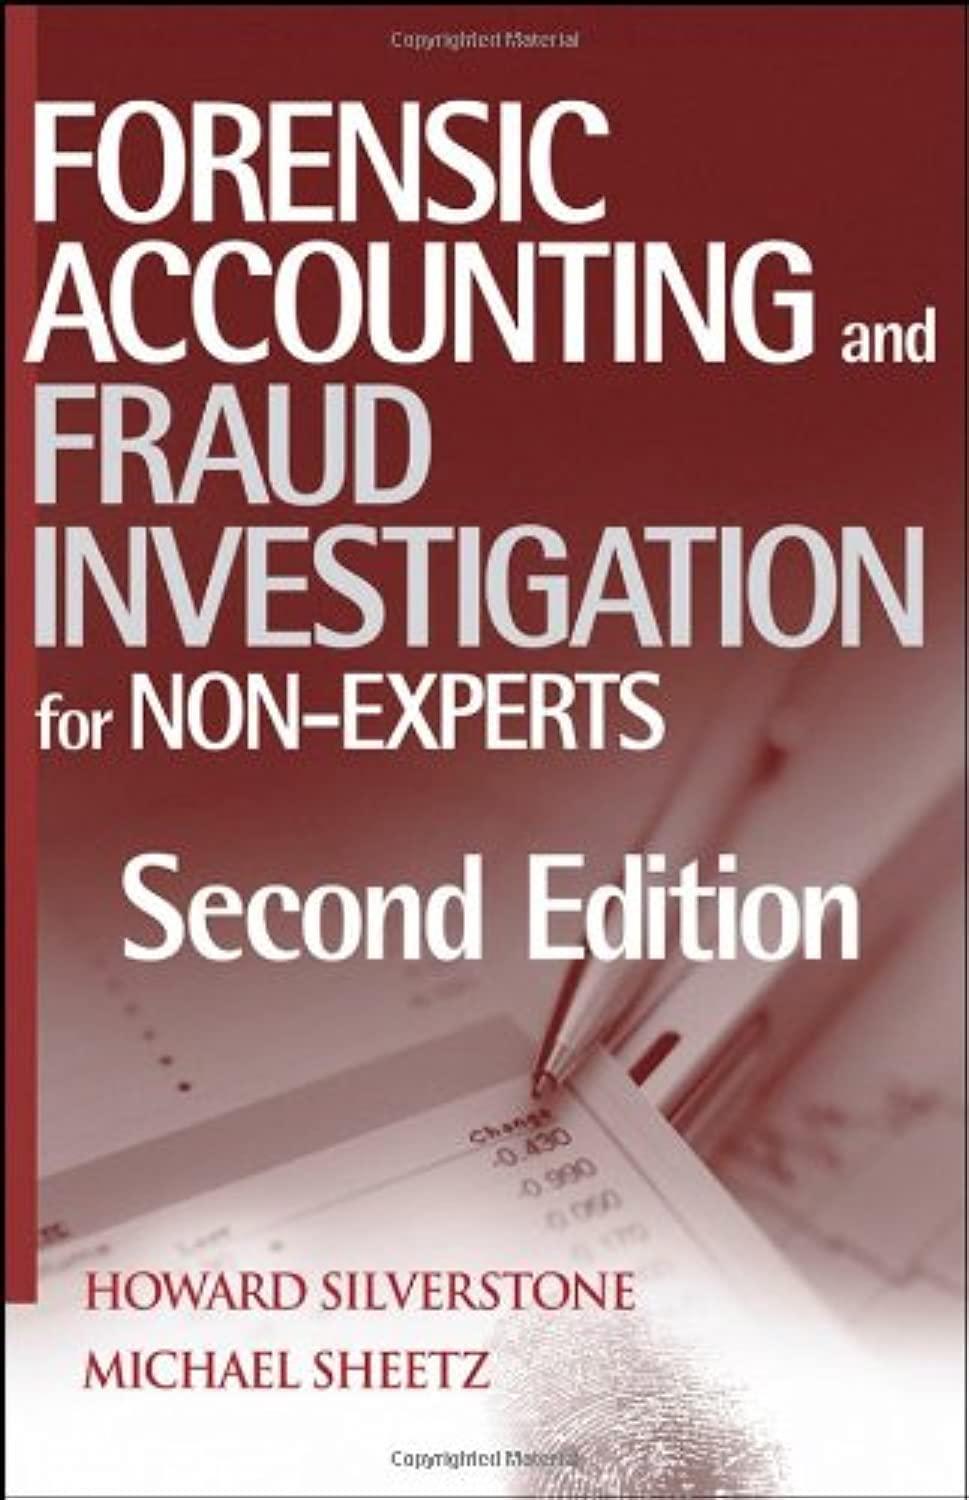 forensic accounting and fraud investigation for non-experts 2nd edition howard silverstone, michael sheetz